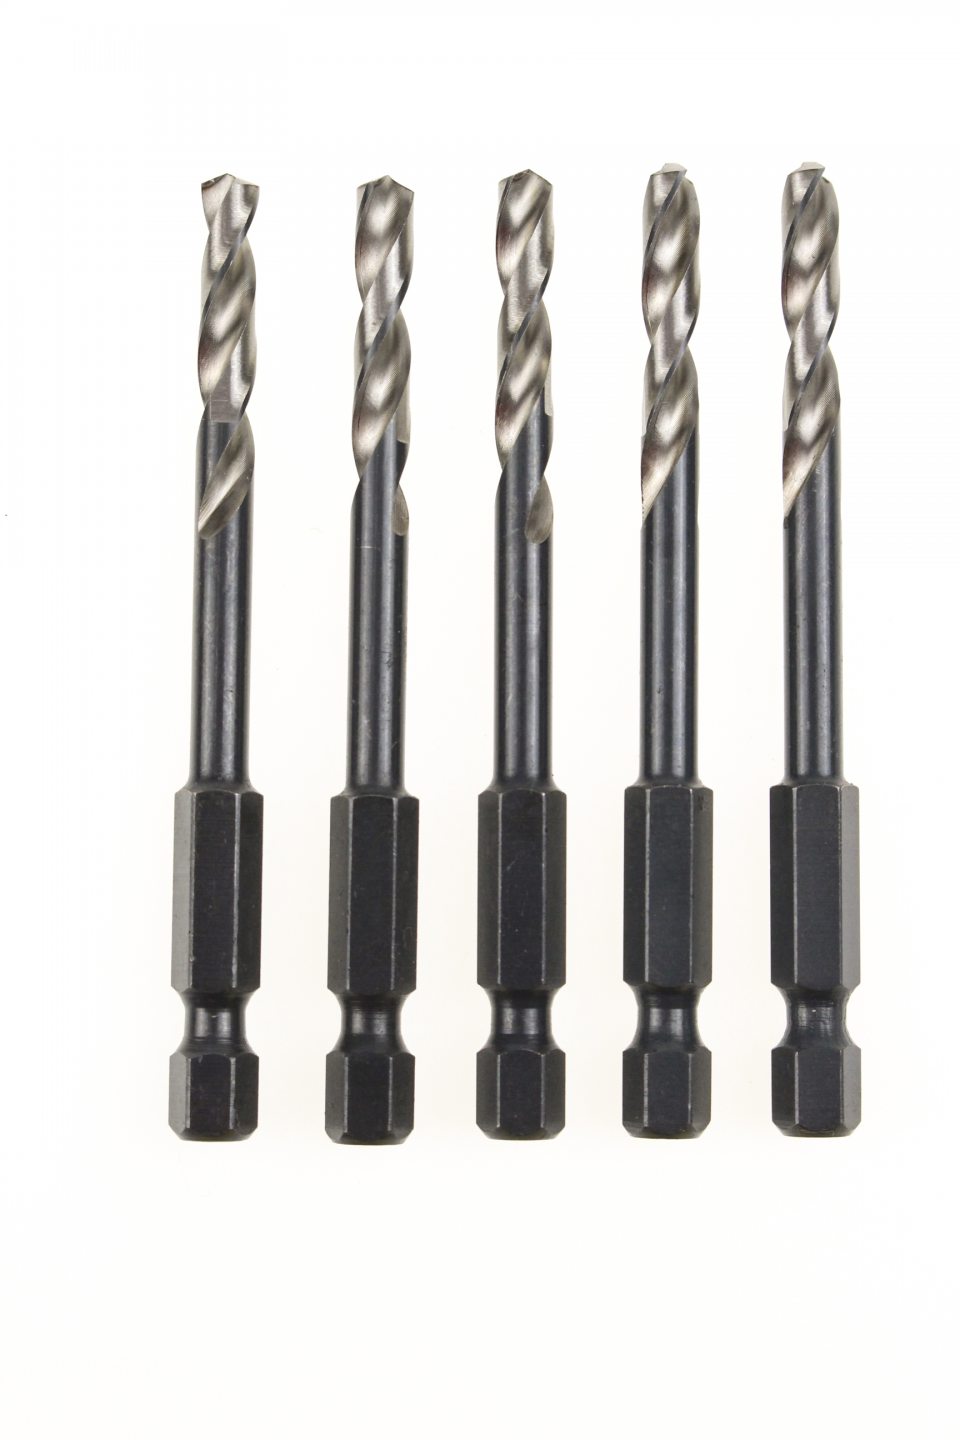 HSS FULLY GROUND DRILL,Whole piece Hex Shank